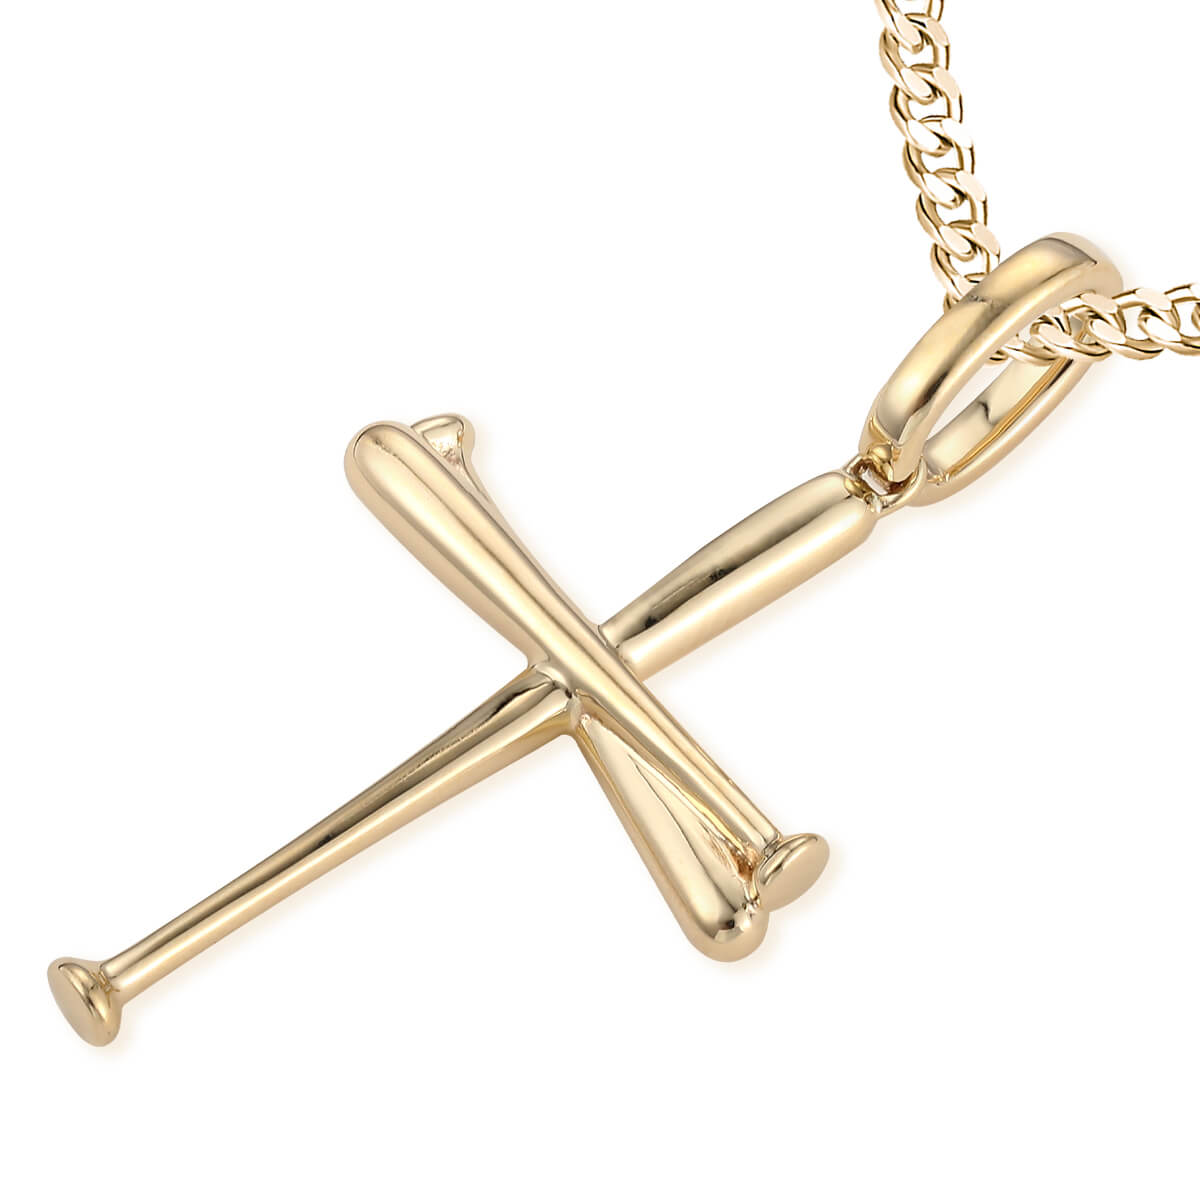 Nofade Silver Boys Mens Baseball Cross Necklace, 925 Sterling Silver Baseball  Bats Athletes Cross Pendant Necklaces Jewelry for Men Women Boys Girls :  Amazon.ca: Clothing, Shoes & Accessories